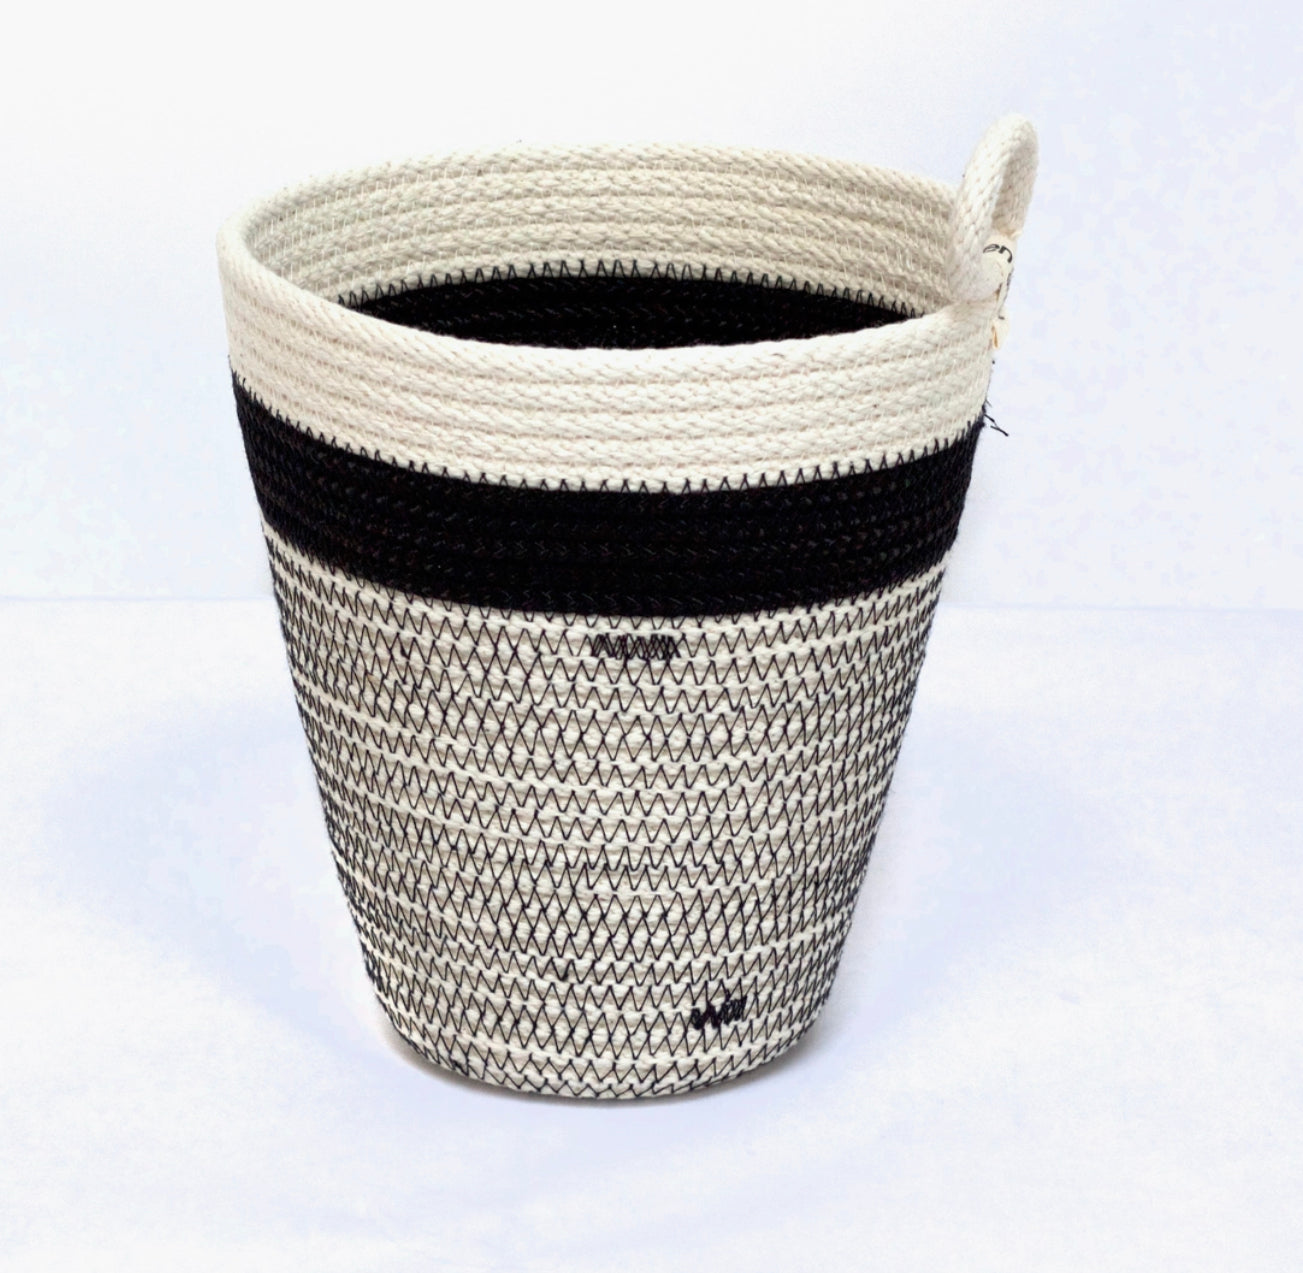 Black and white striped woven basket by Woven Grey